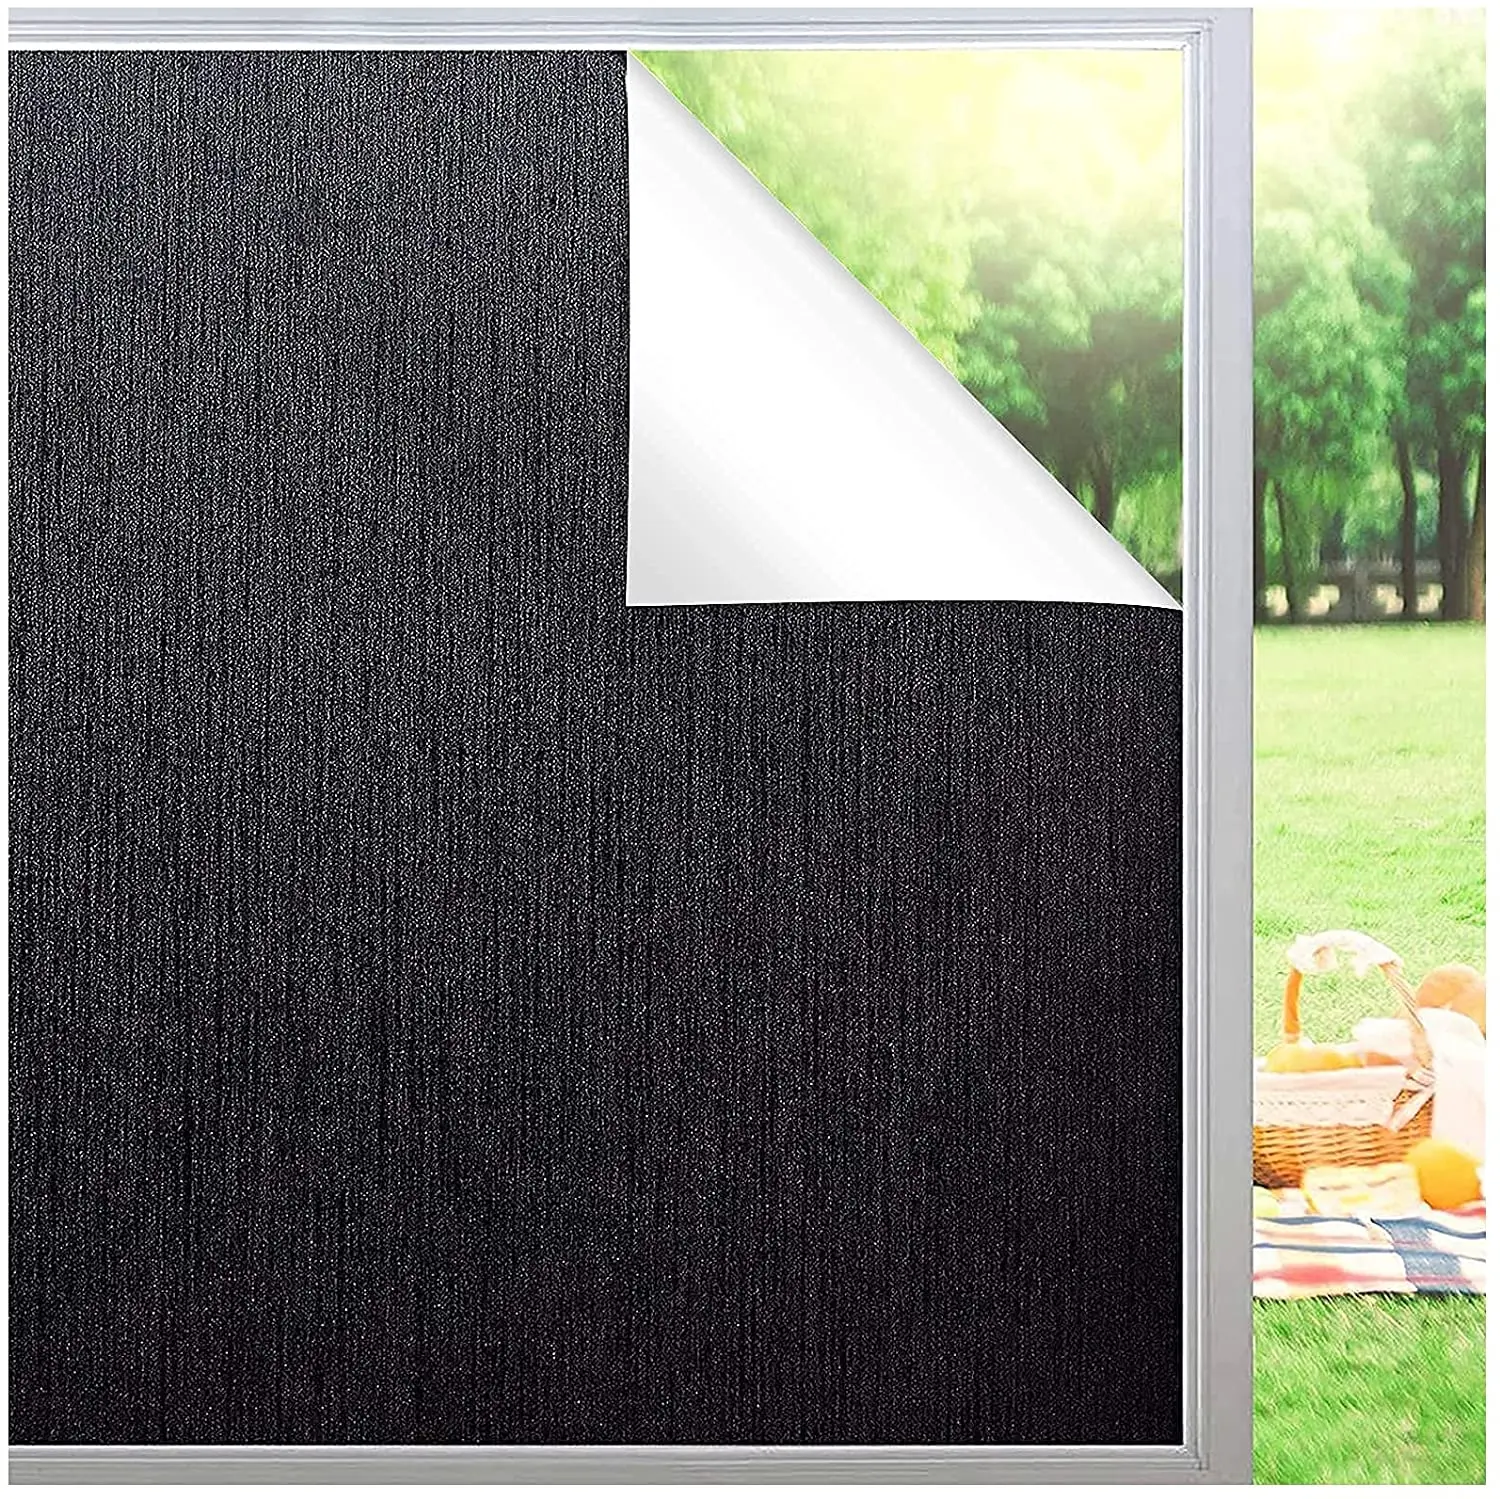 

Black White Sun Blocking Privacy Window Film Frosted Static Cling Window Tint Covering 100% Light Blocking Anti Glare Film